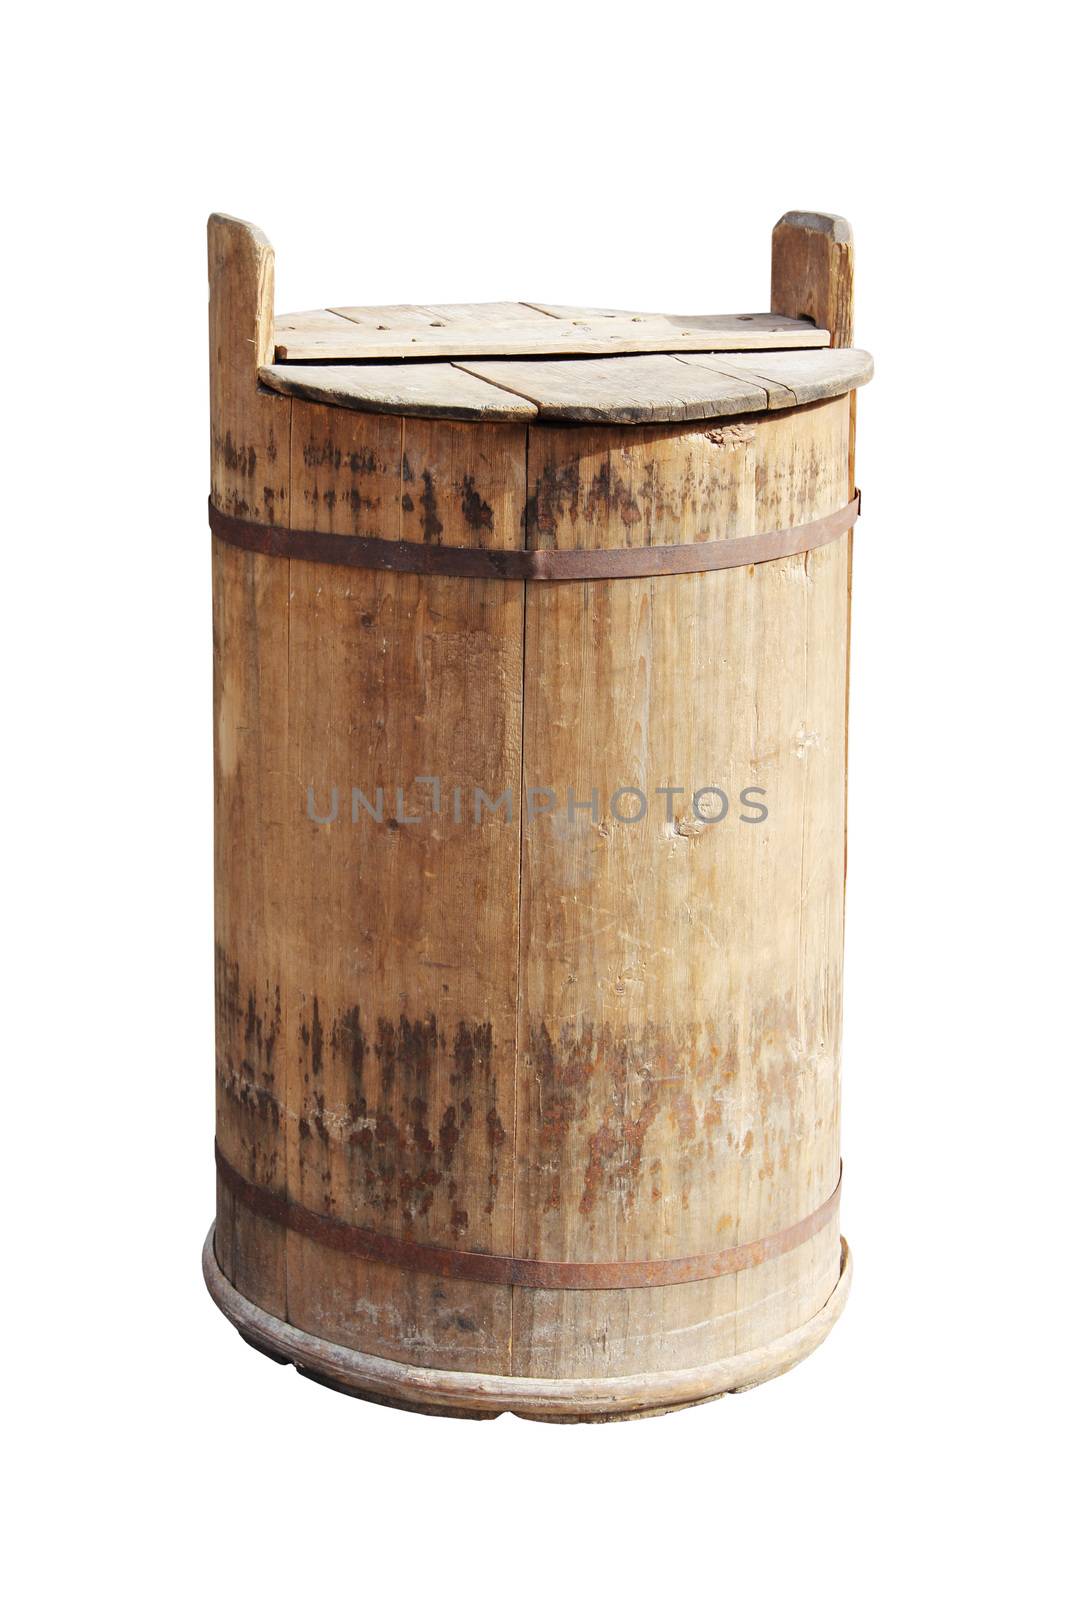 Old wooden Barrel isolated on white background